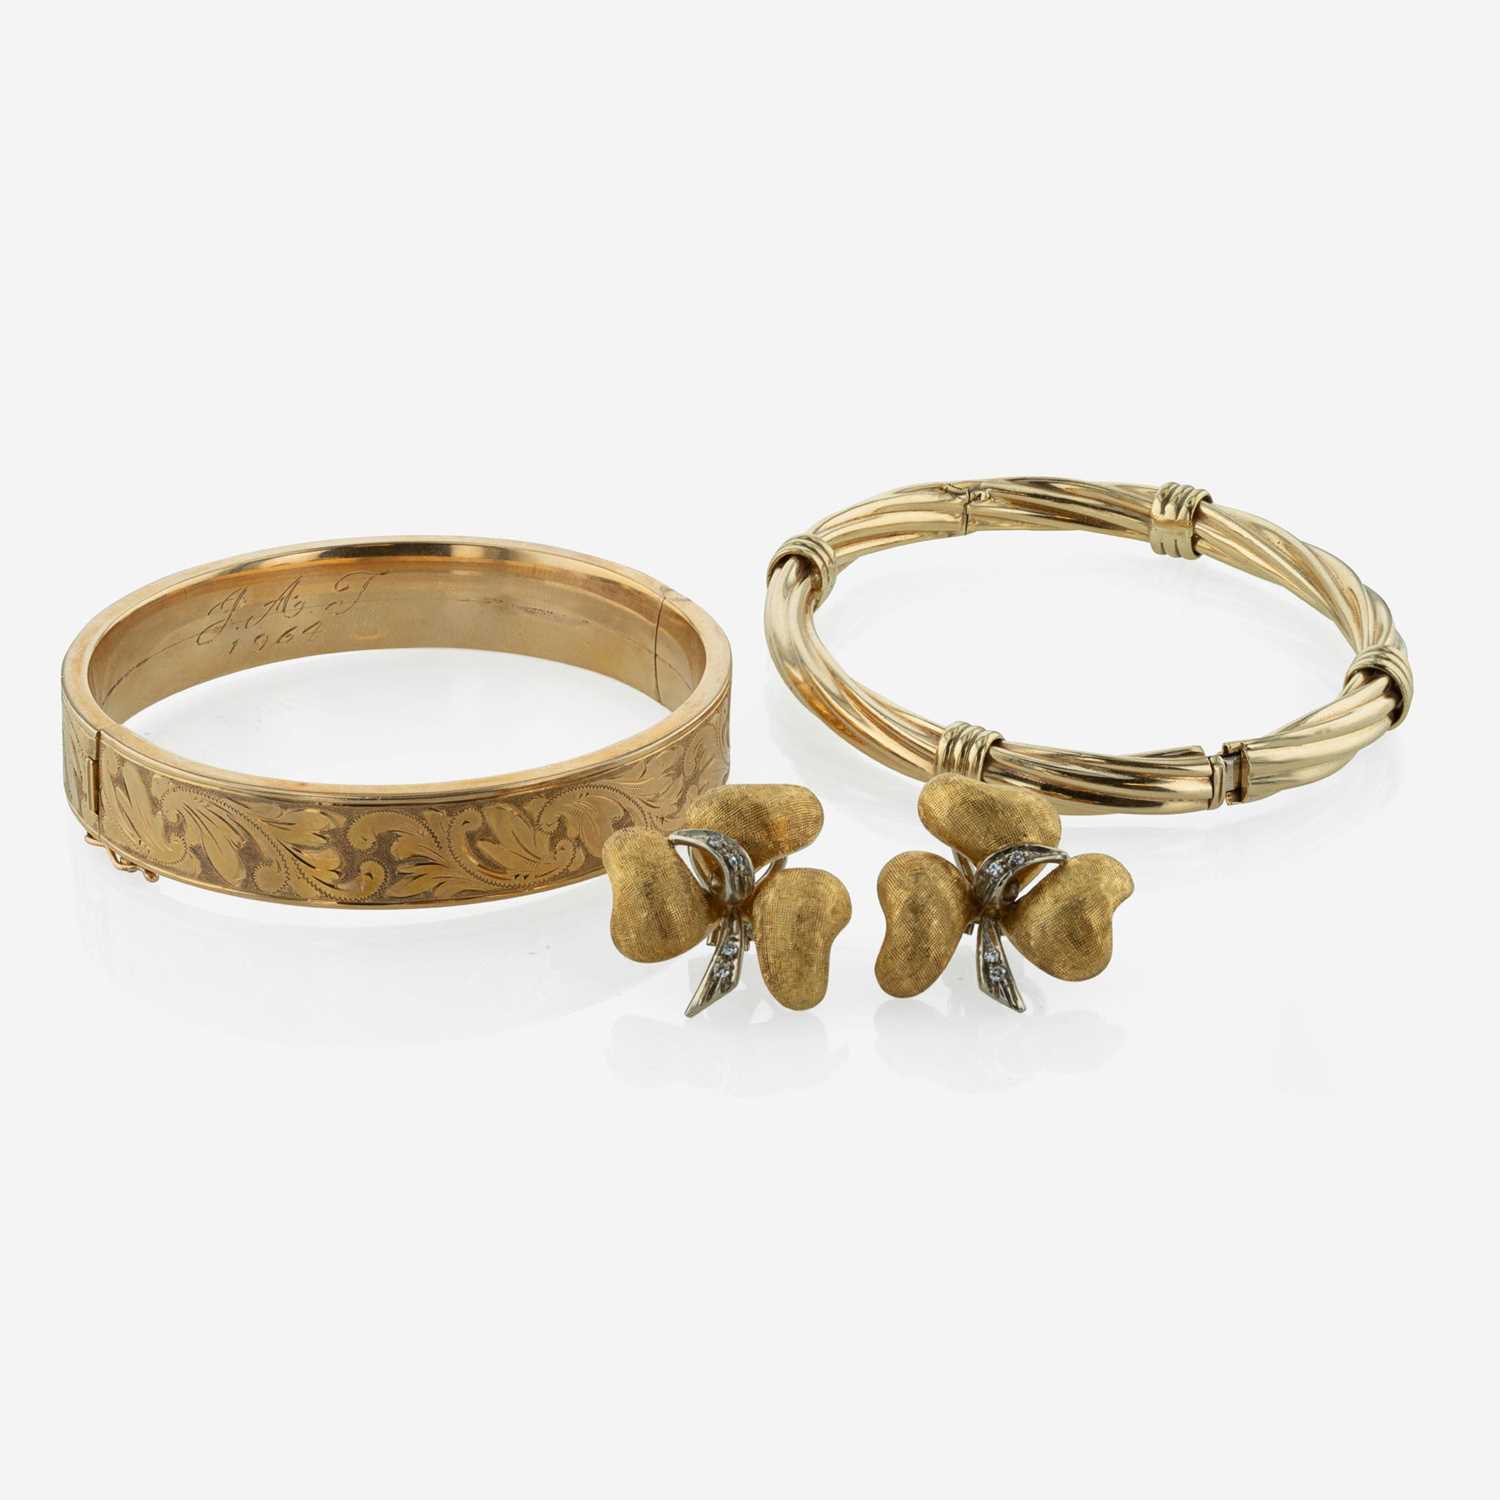 Lot 250 - A Collection of Yellow Gold Bangles and Diamond and Gold Earrings